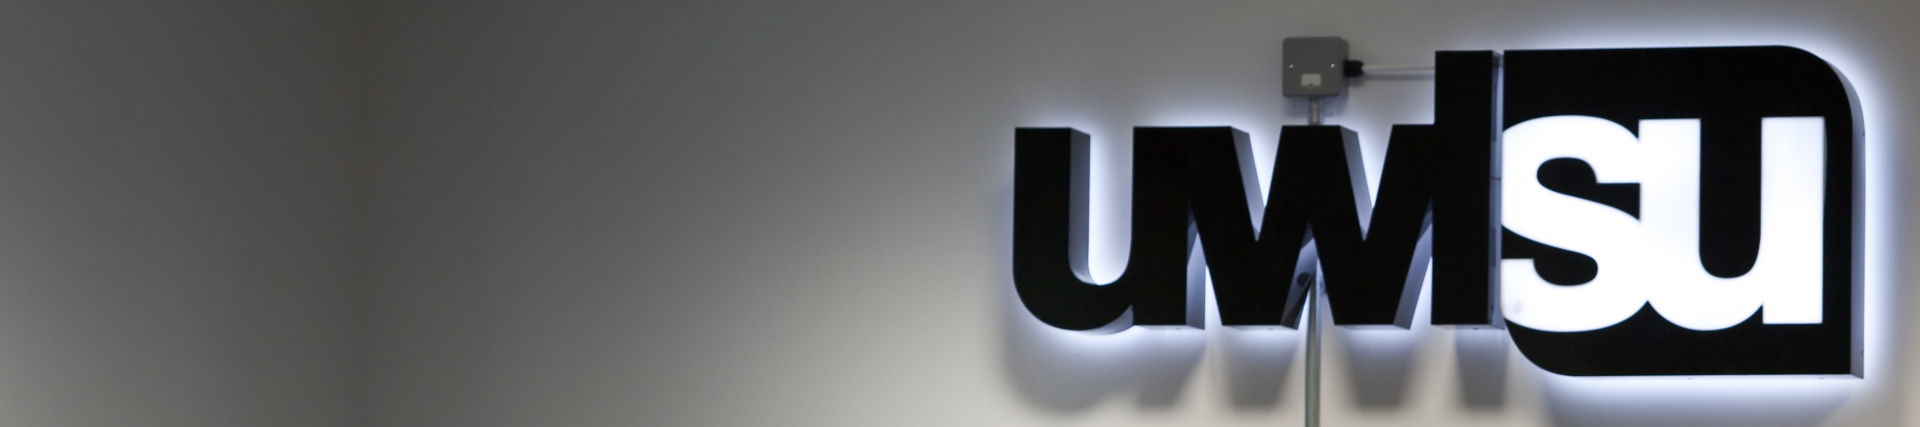 The UWLSU logo, mounted on a wall in the Student's Union